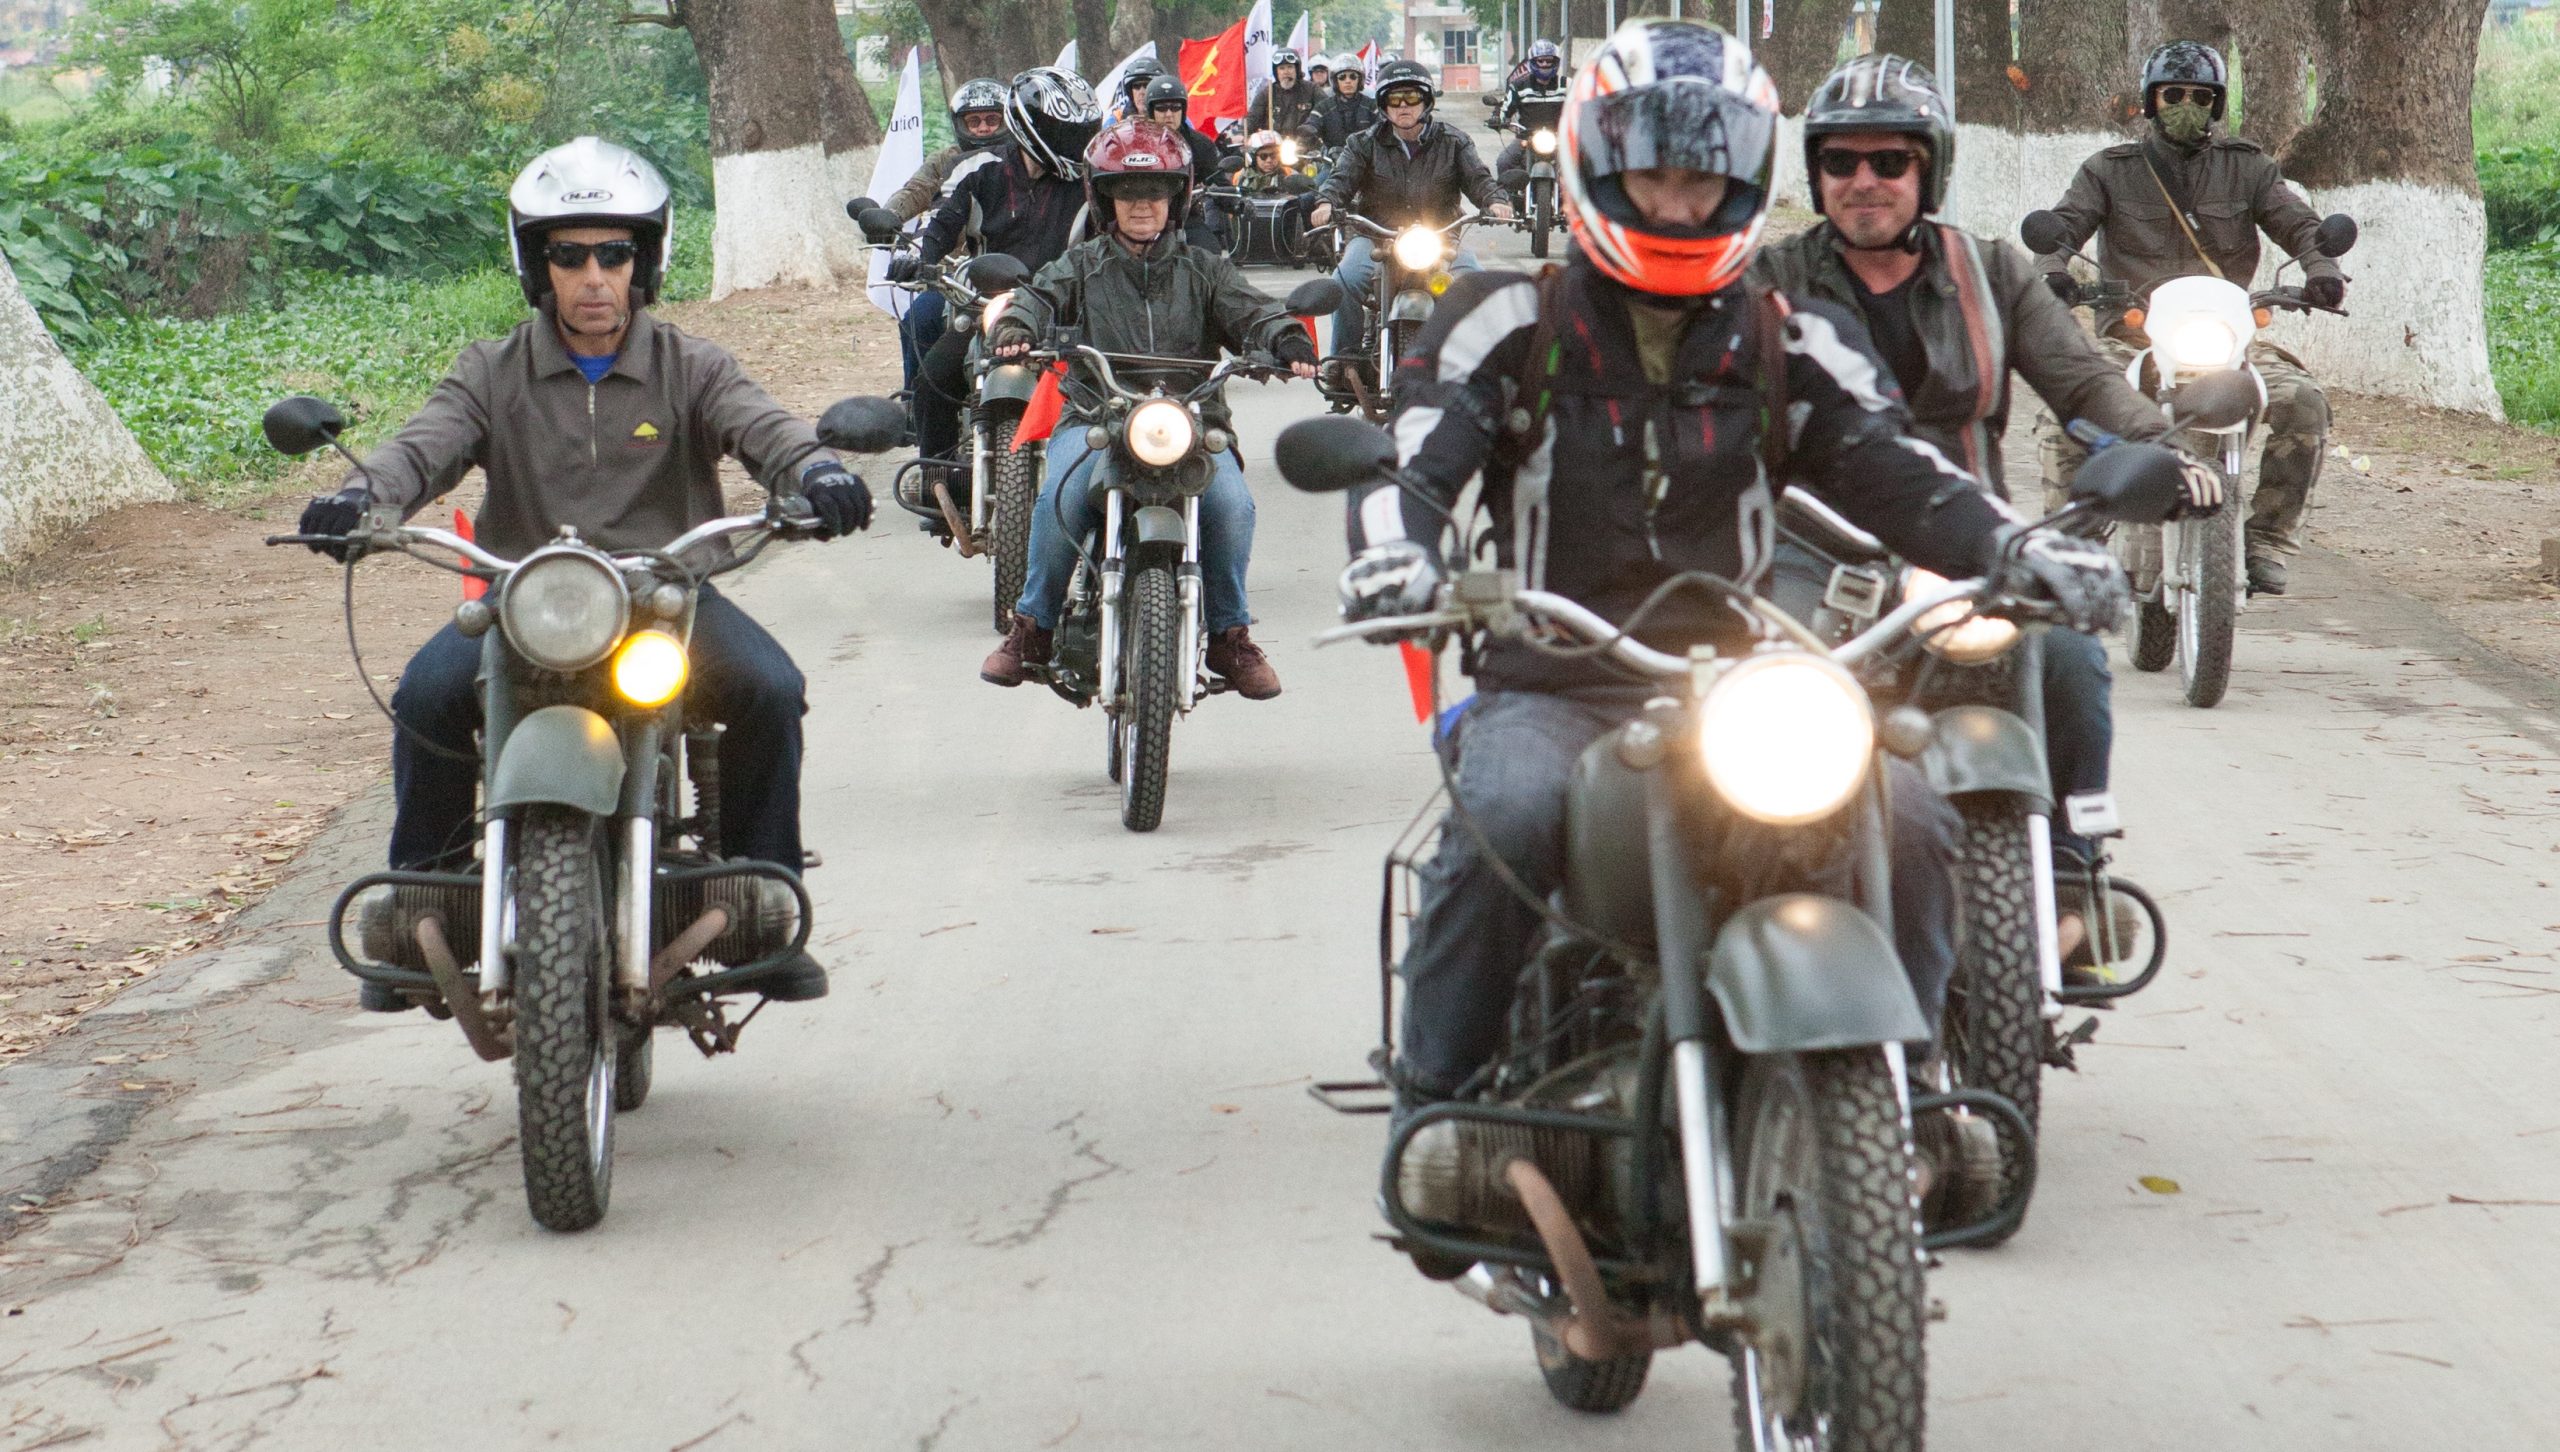 Charley Boorman riding with Explore Indochina